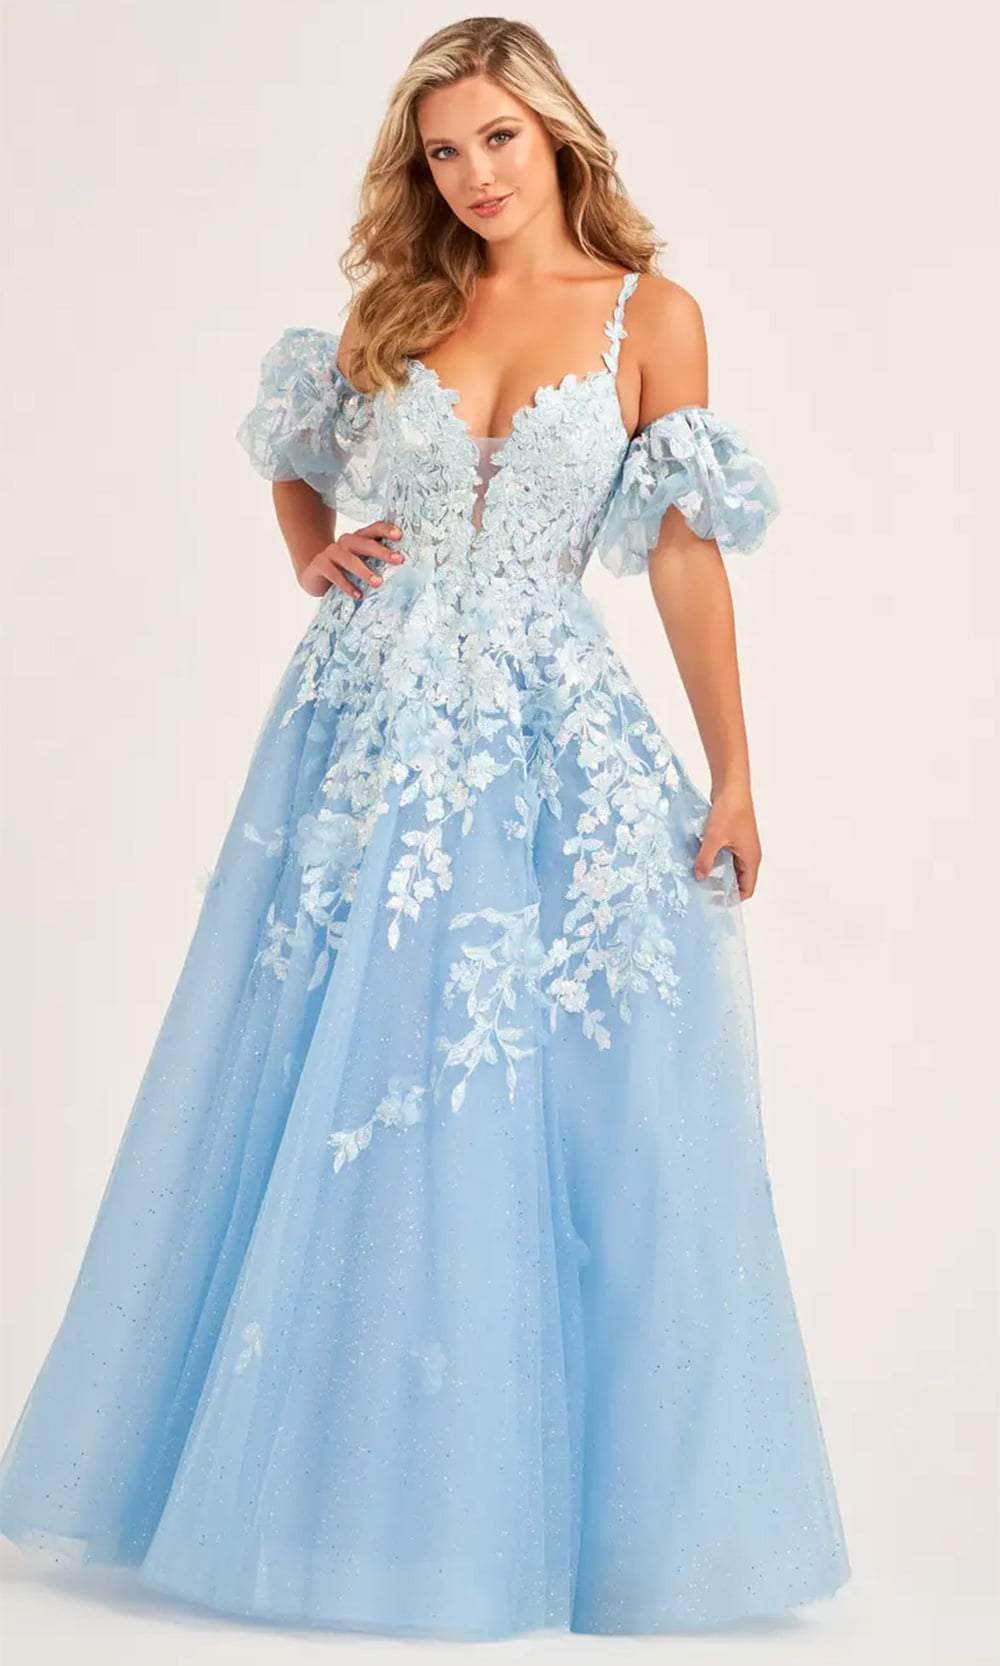 Ellie Wilde EW35205 - Lace Applique Embellished Corset Bodice Prom Gown
